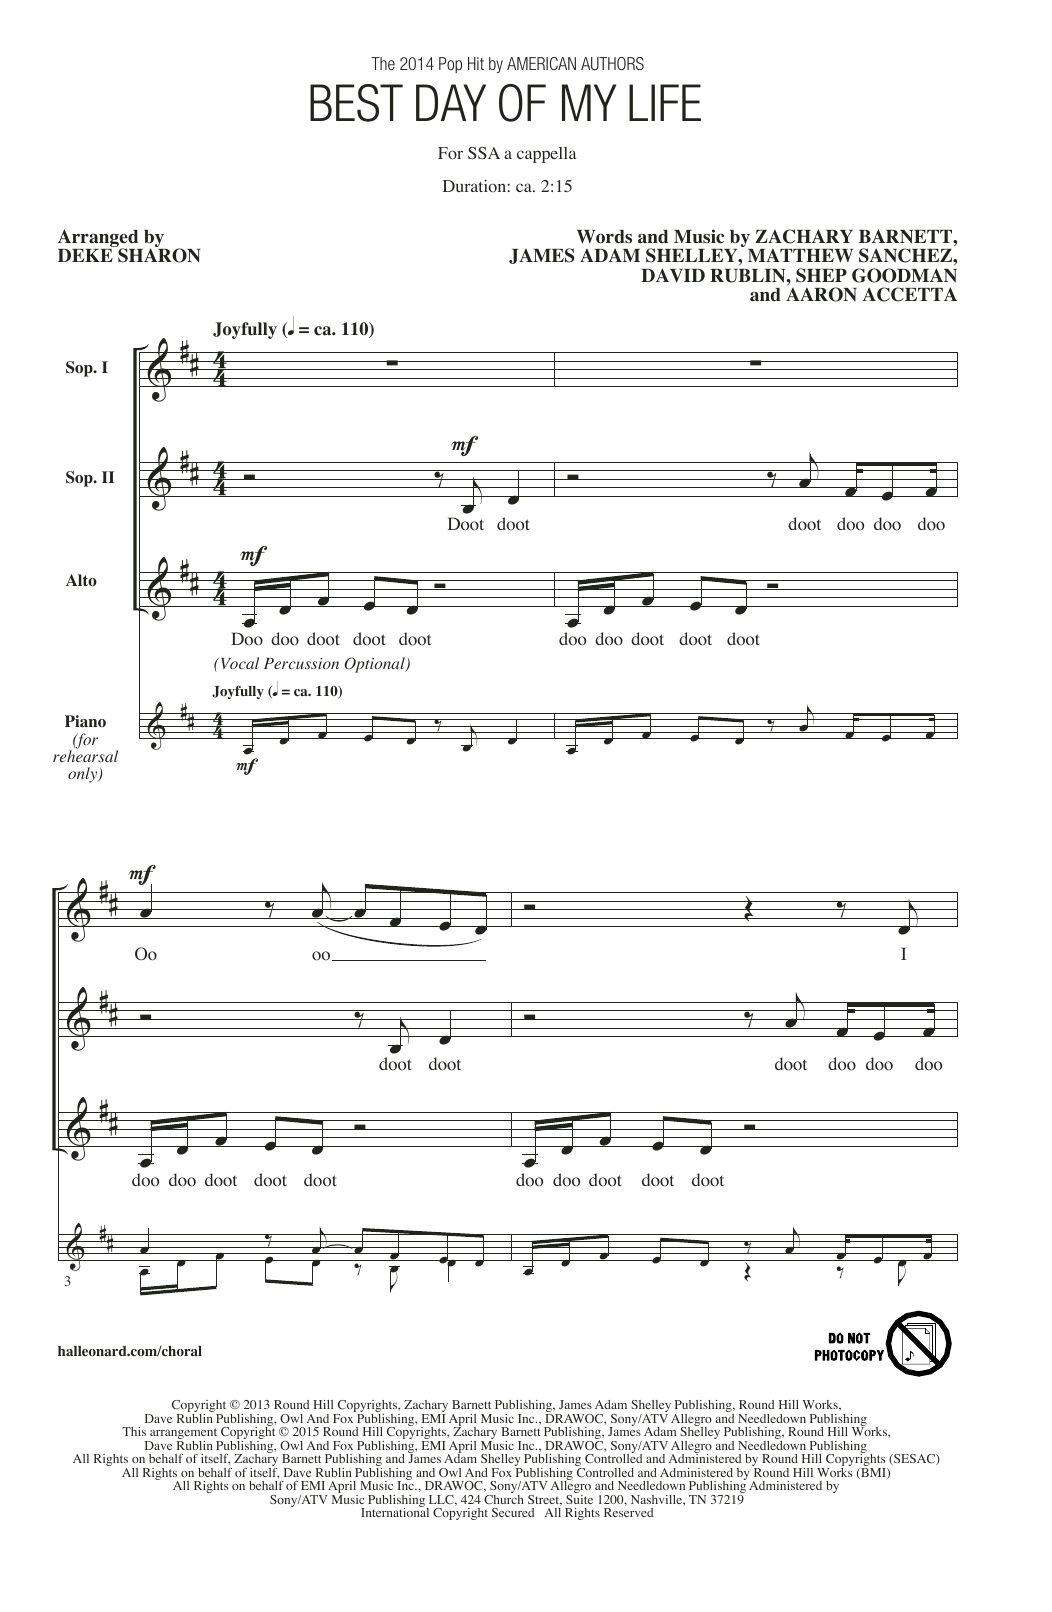 American Authors Best Day Of My Life (arr. Deke Sharon) sheet music notes and chords. Download Printable PDF.